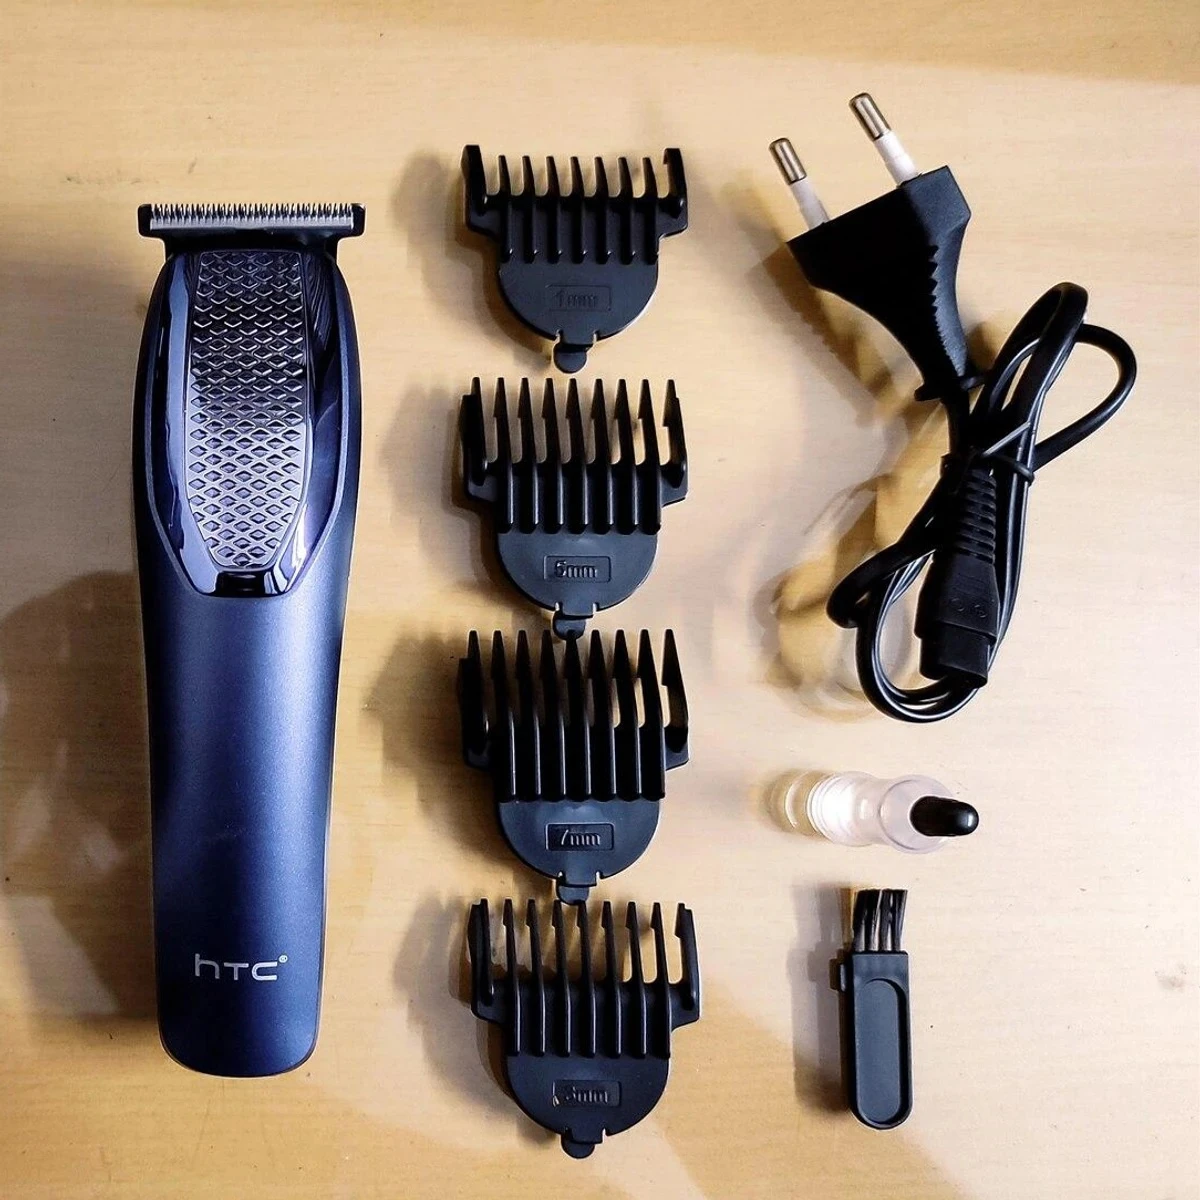 HTC AT-1210 RECHARGEABLE HAIR TRIMMER 18% Off